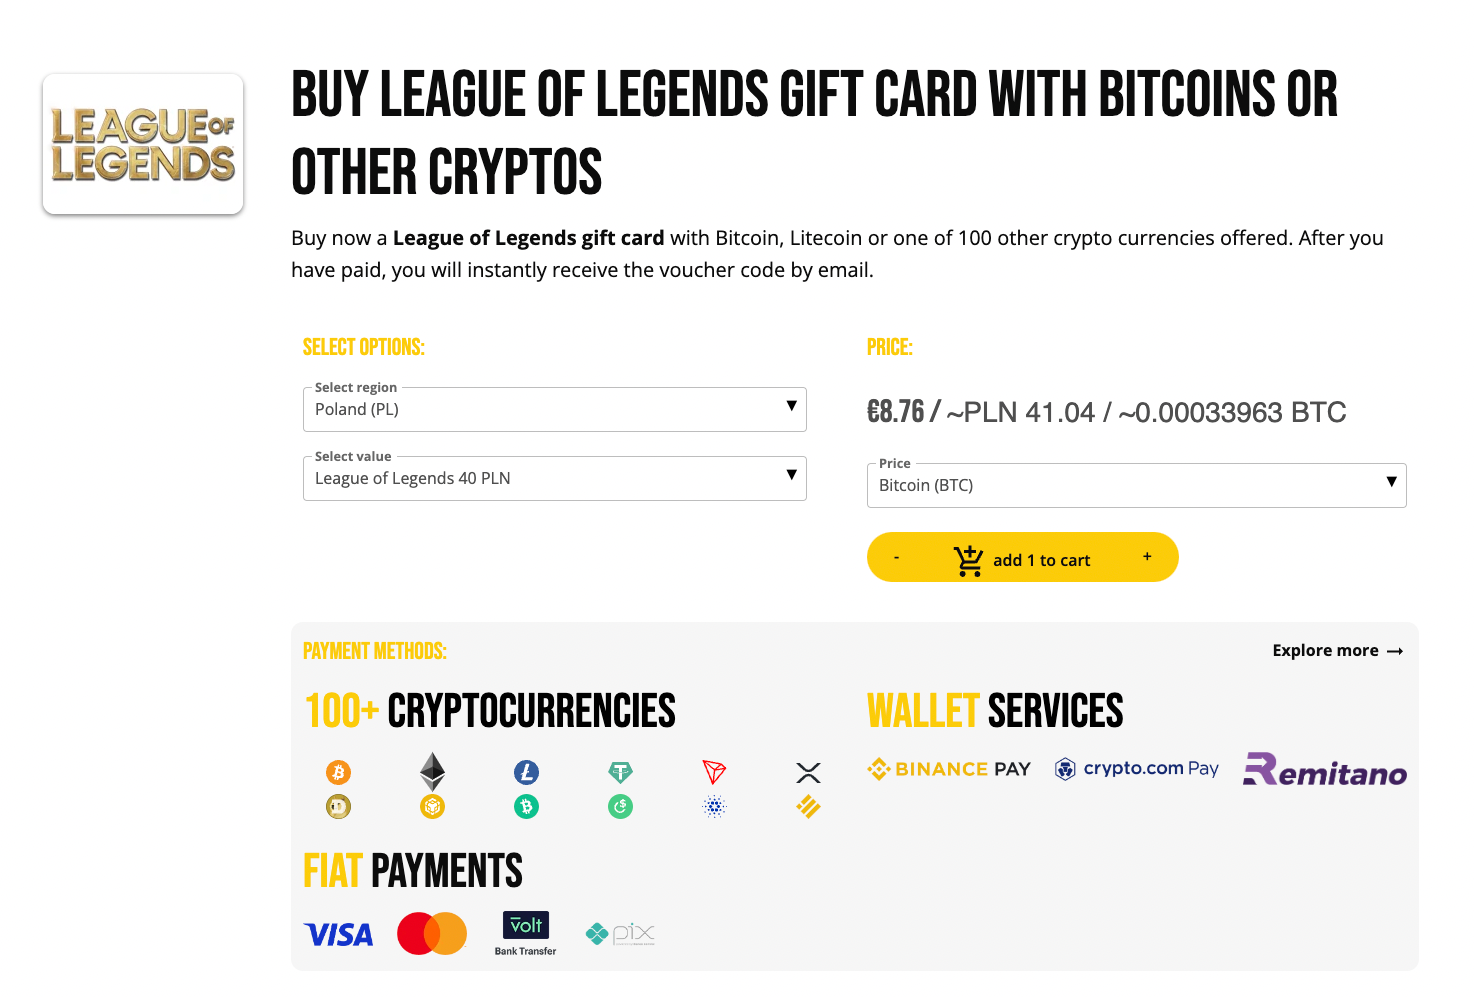 Buy Roblox gift cards with Crypto - Coinsbee